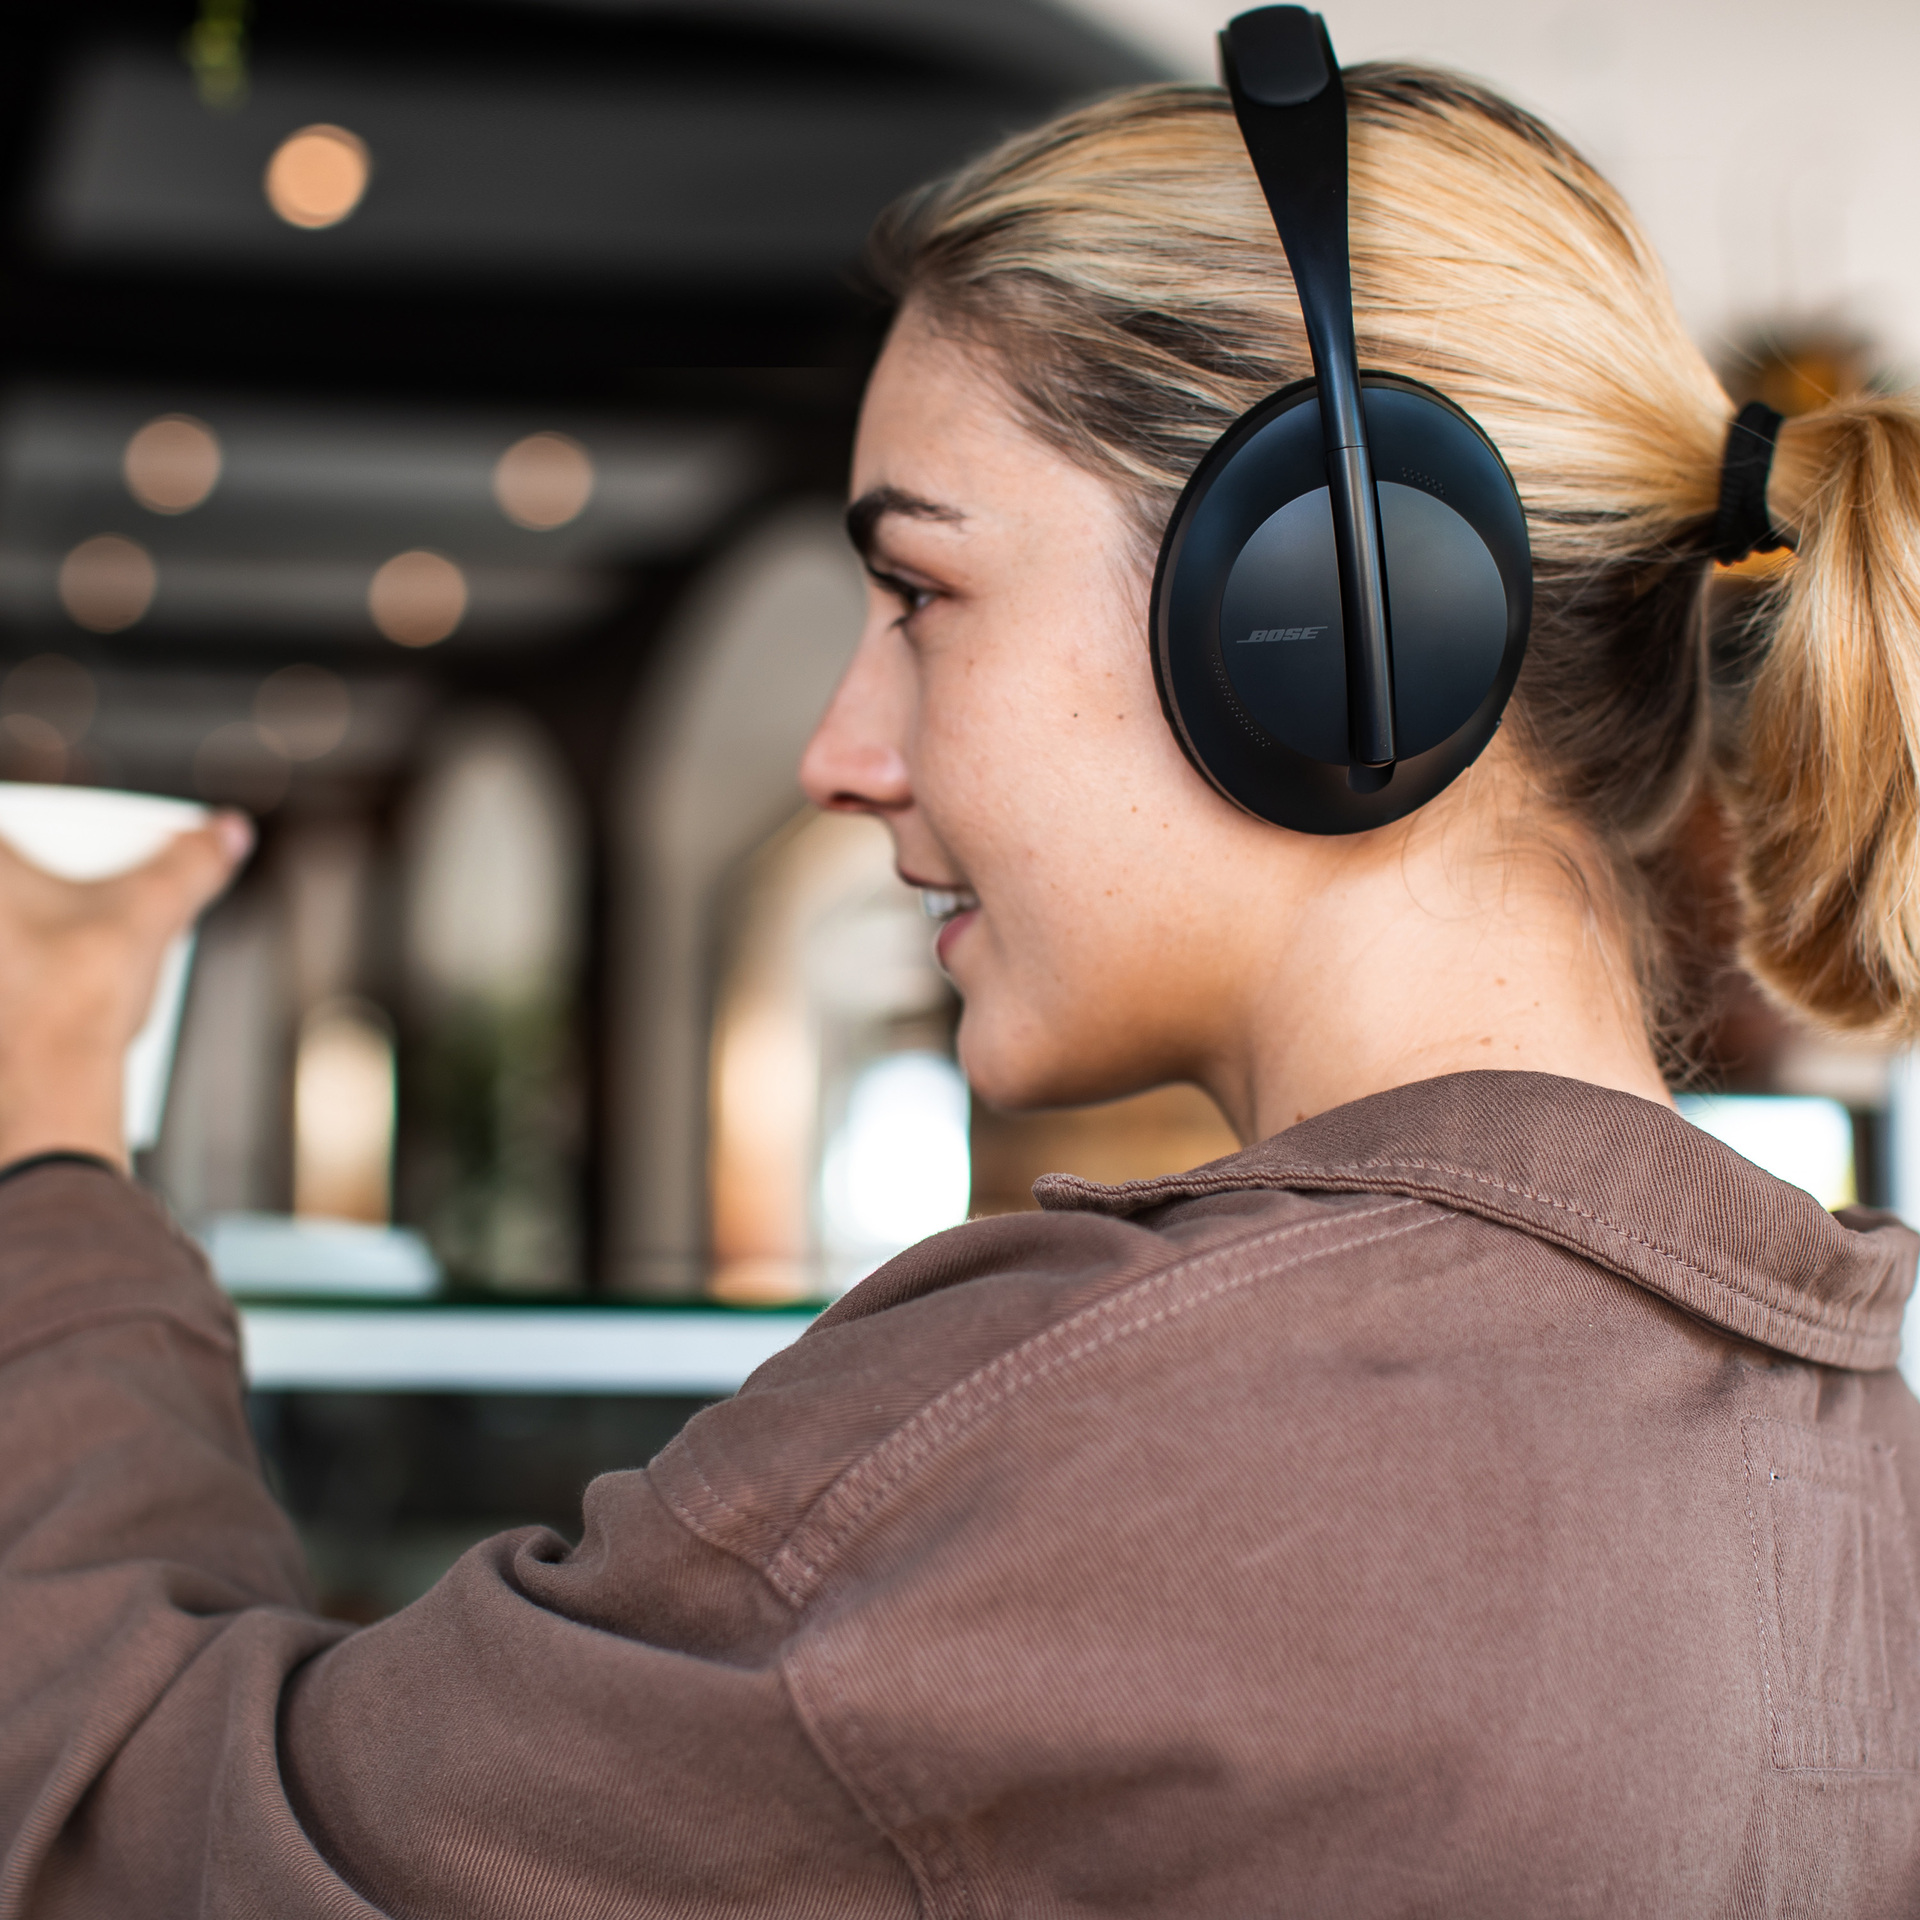 A woman wearing the Bose Headphones 700 in black.